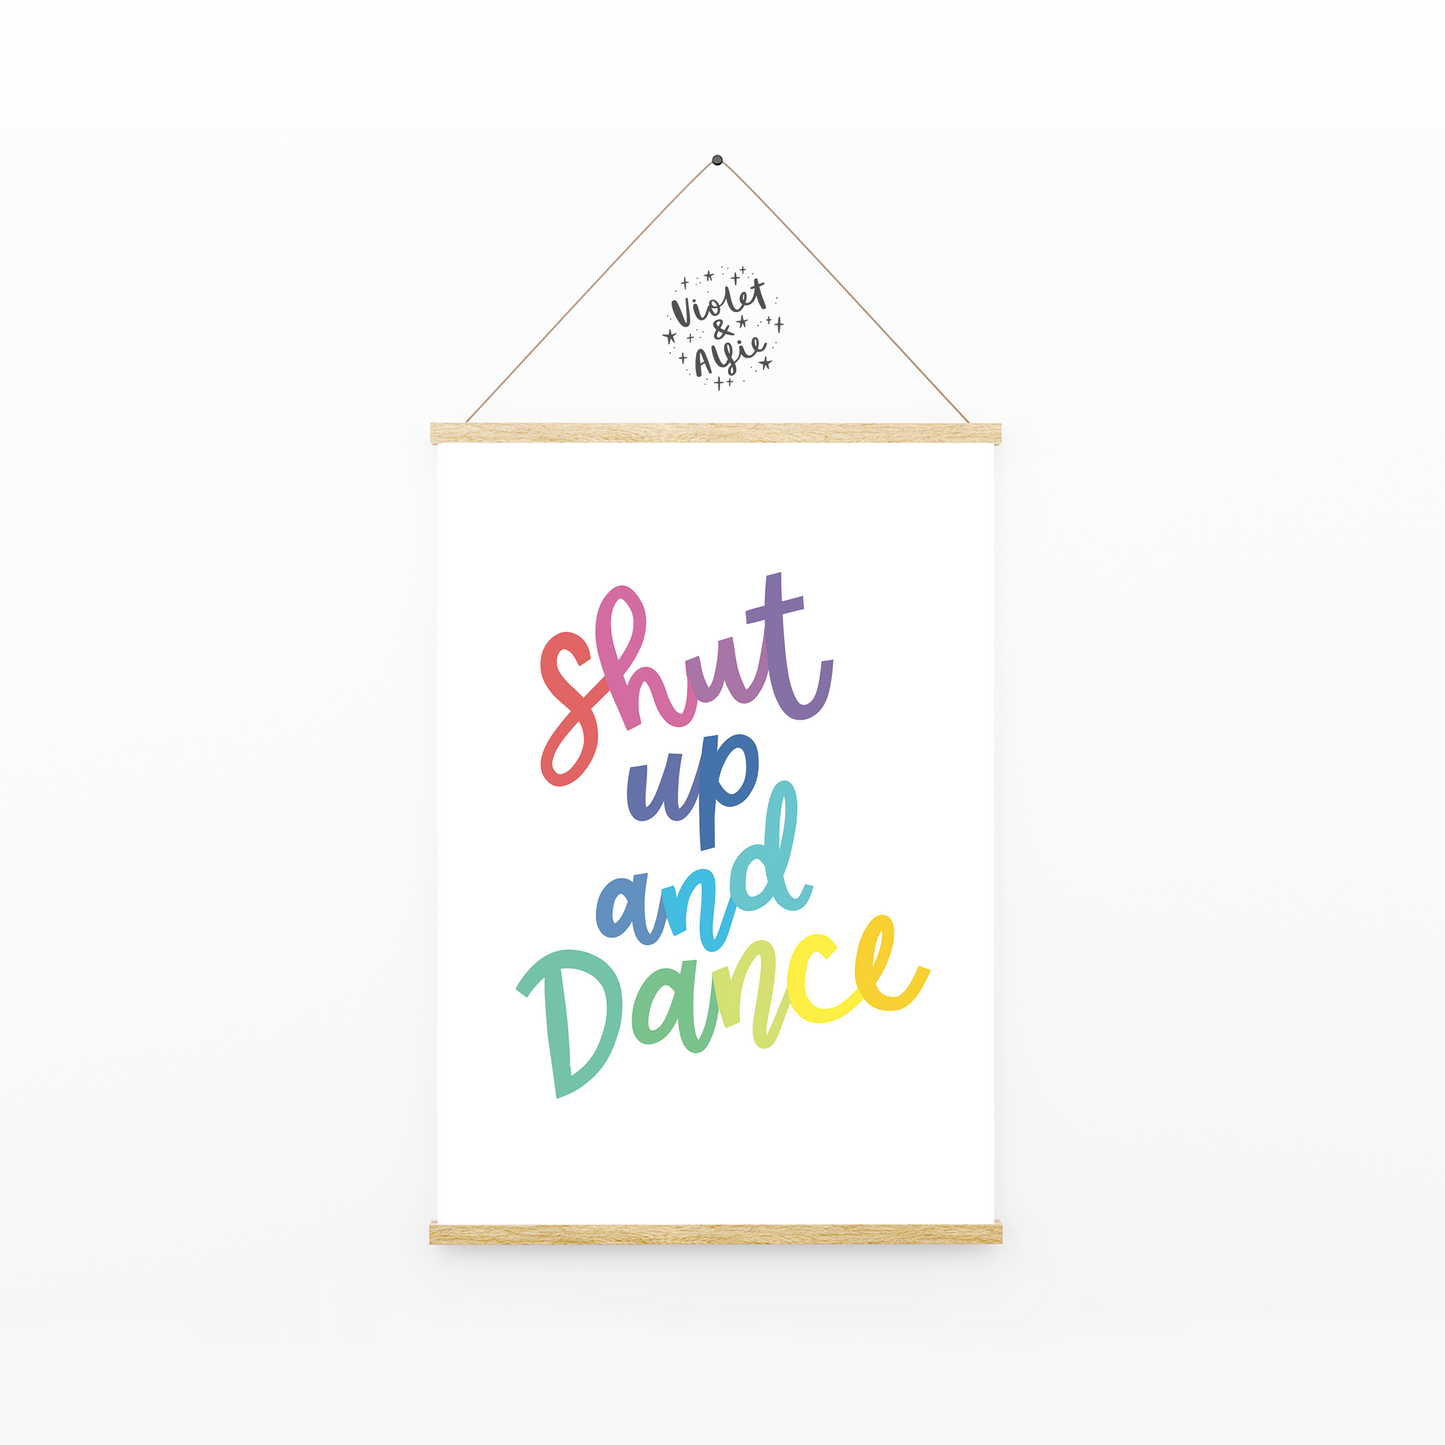 shut up and dance print, dance it out print, rainbow decor, colourful wall art, hand lettered prints, prints for your home, kitchen decor, happy wall art